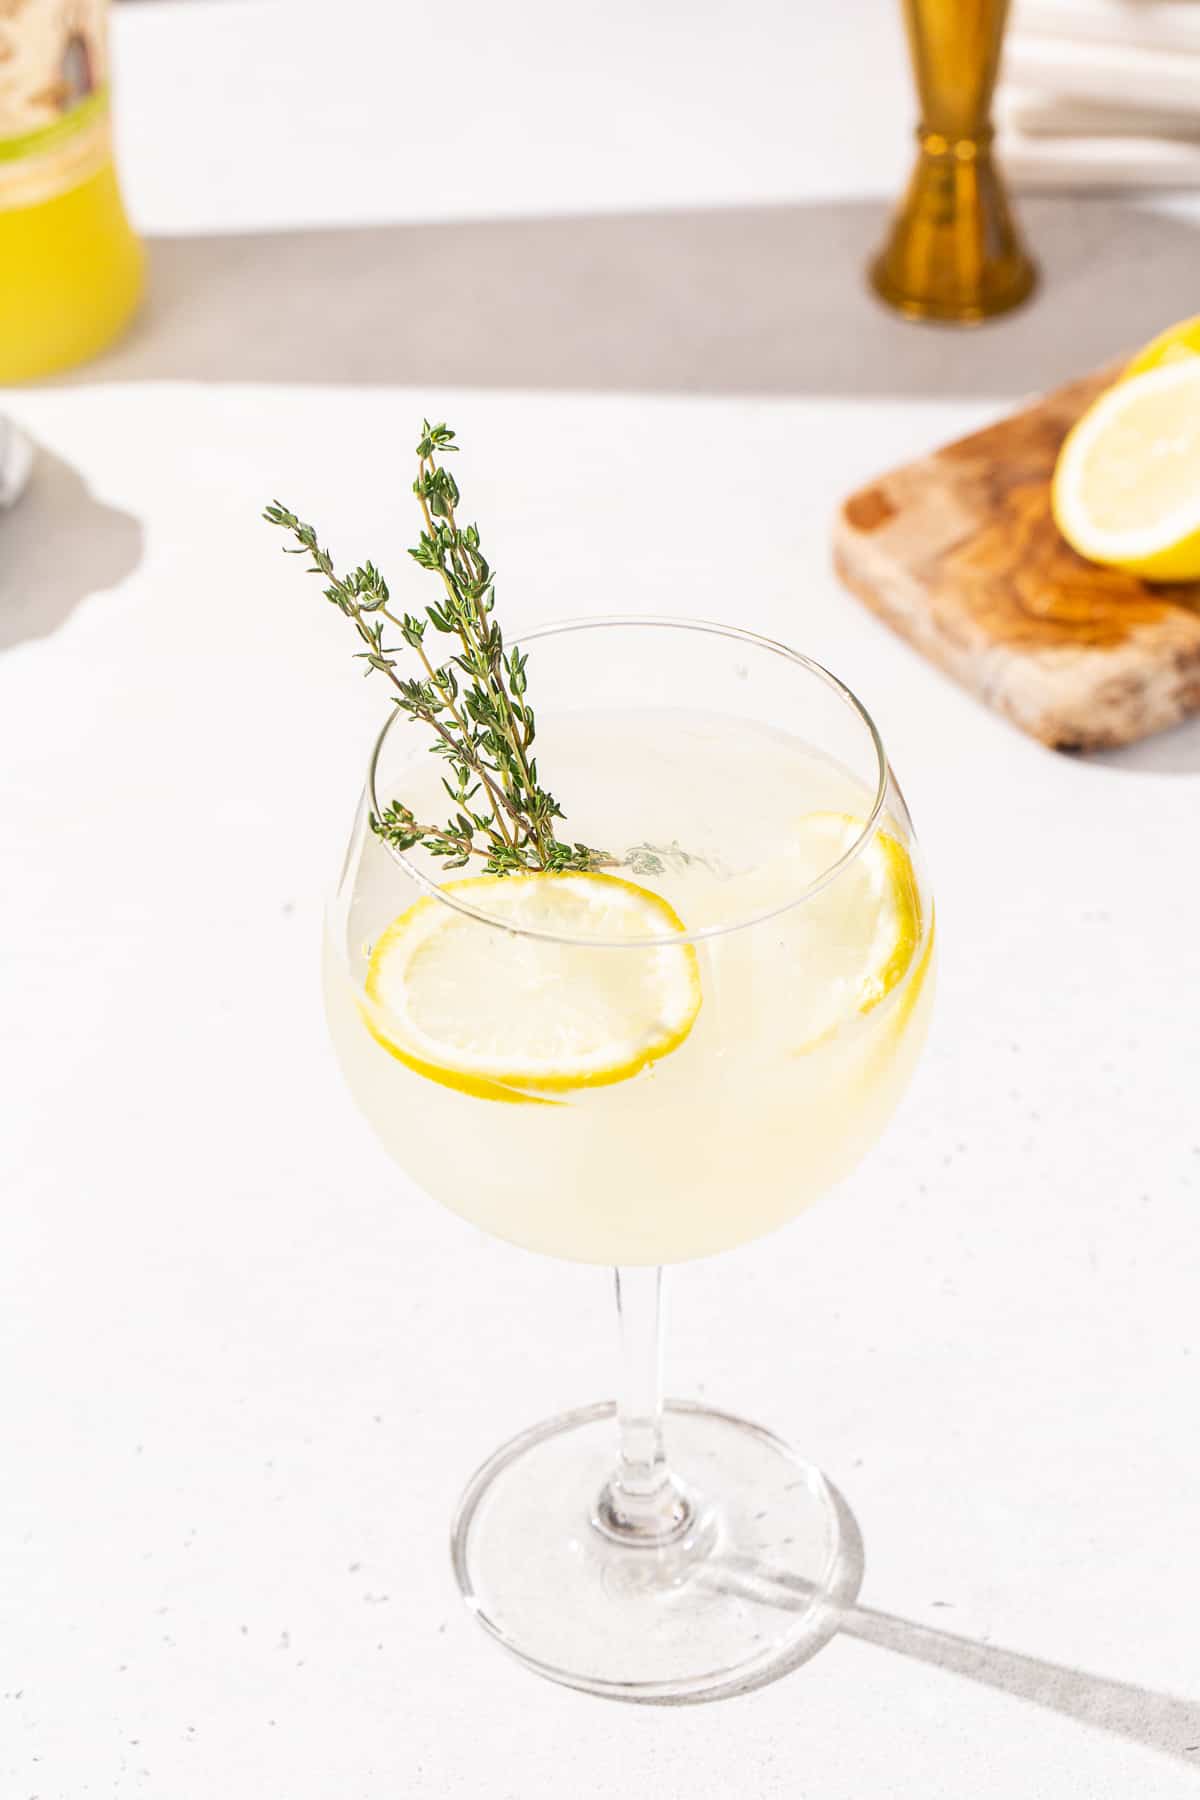 Slightly overhead view of Limoncello Spritz cocktail on a countertop. A bottle of limoncello, a jigger and a wood cutting board with cut lemon slices are visible in the background. The drink has a fresh thyme sprig and lemon slices as garnish.